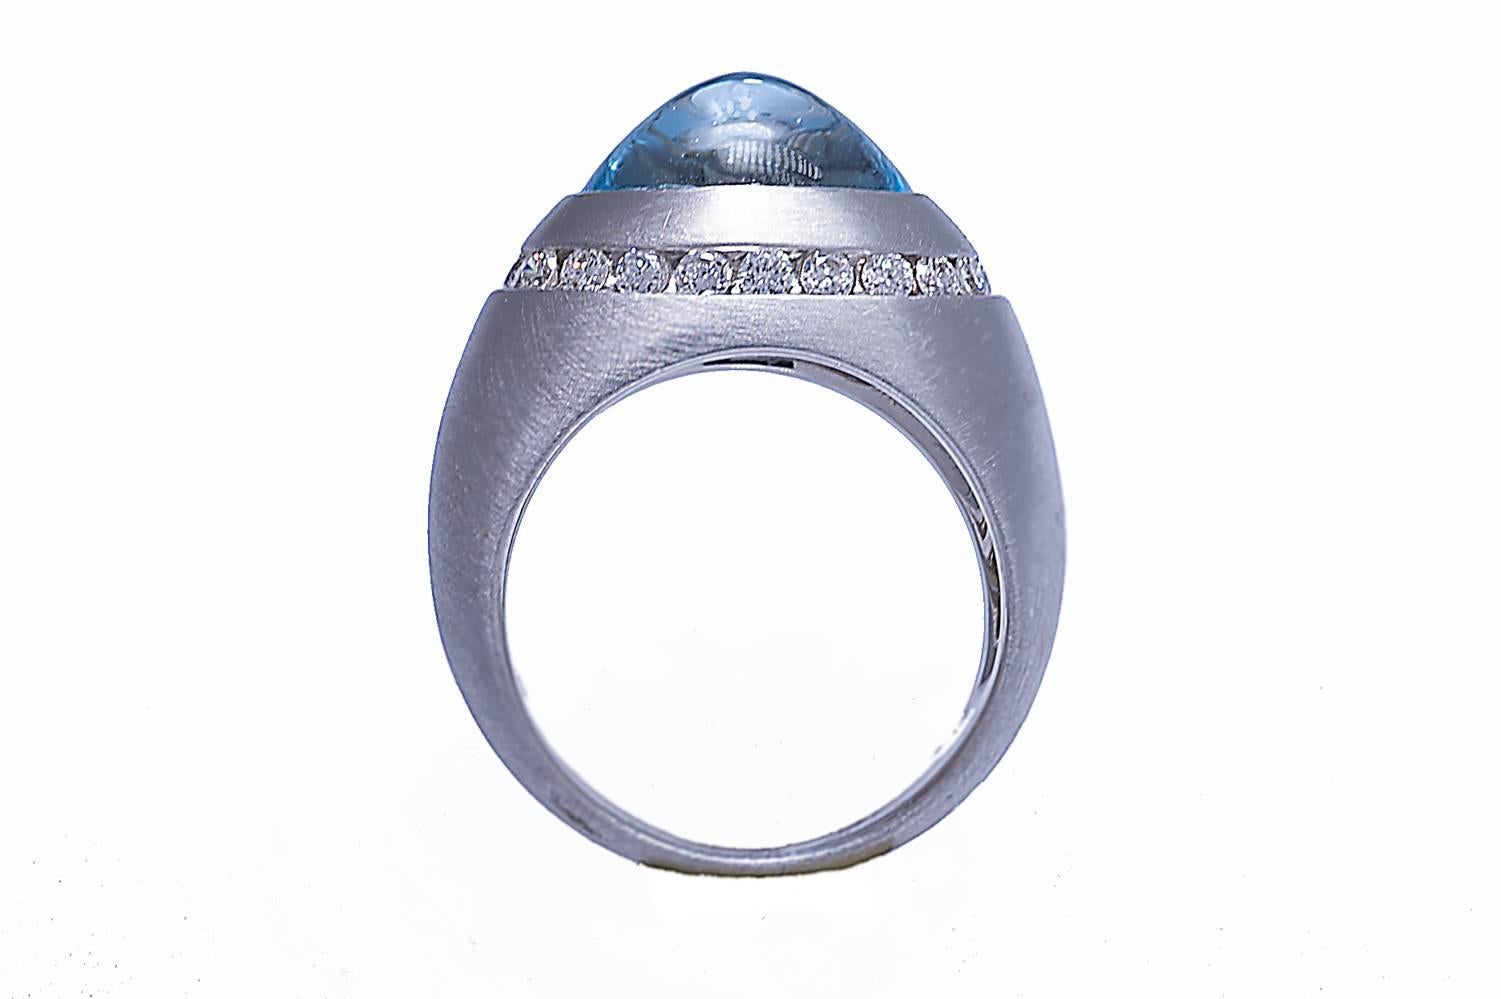 18K white gold blue topaz and diamond ring. The blue topaz is a cabochon weighing 5.09 carats. The diamonds weigh combined 0.51 carat. The ring has a satin finish.
The ring can be sized.







